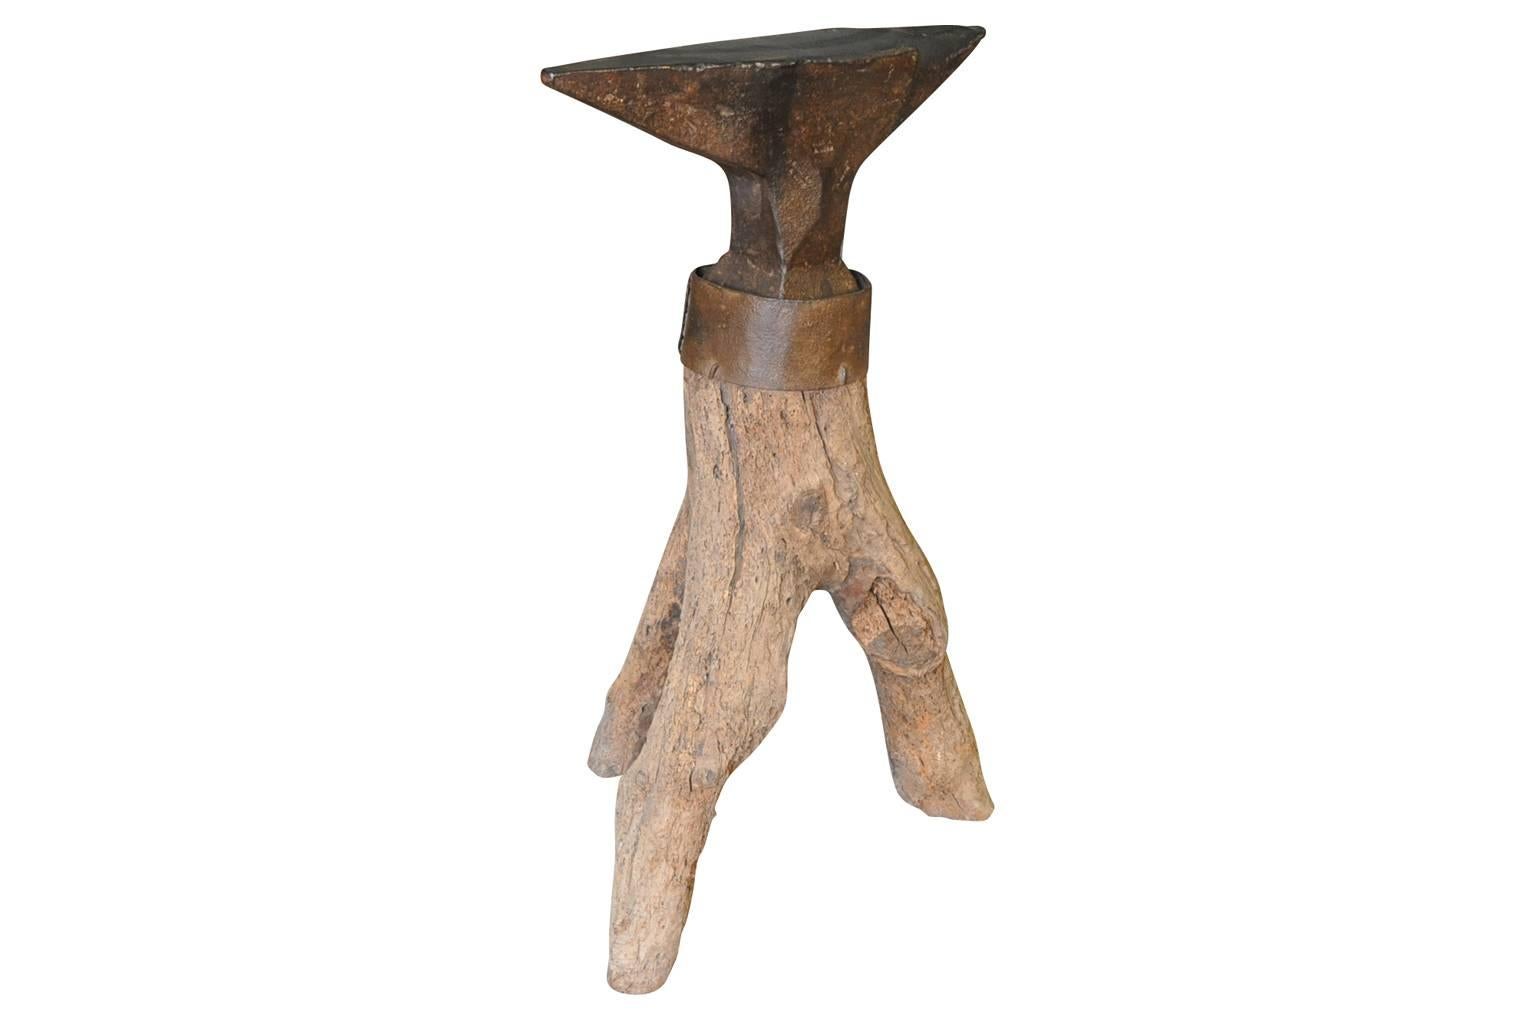 A wonderful 18th century Enclume - Anvil from the South of France. Wonderfully presented on its tree branch base. A terrific sculptural piece.